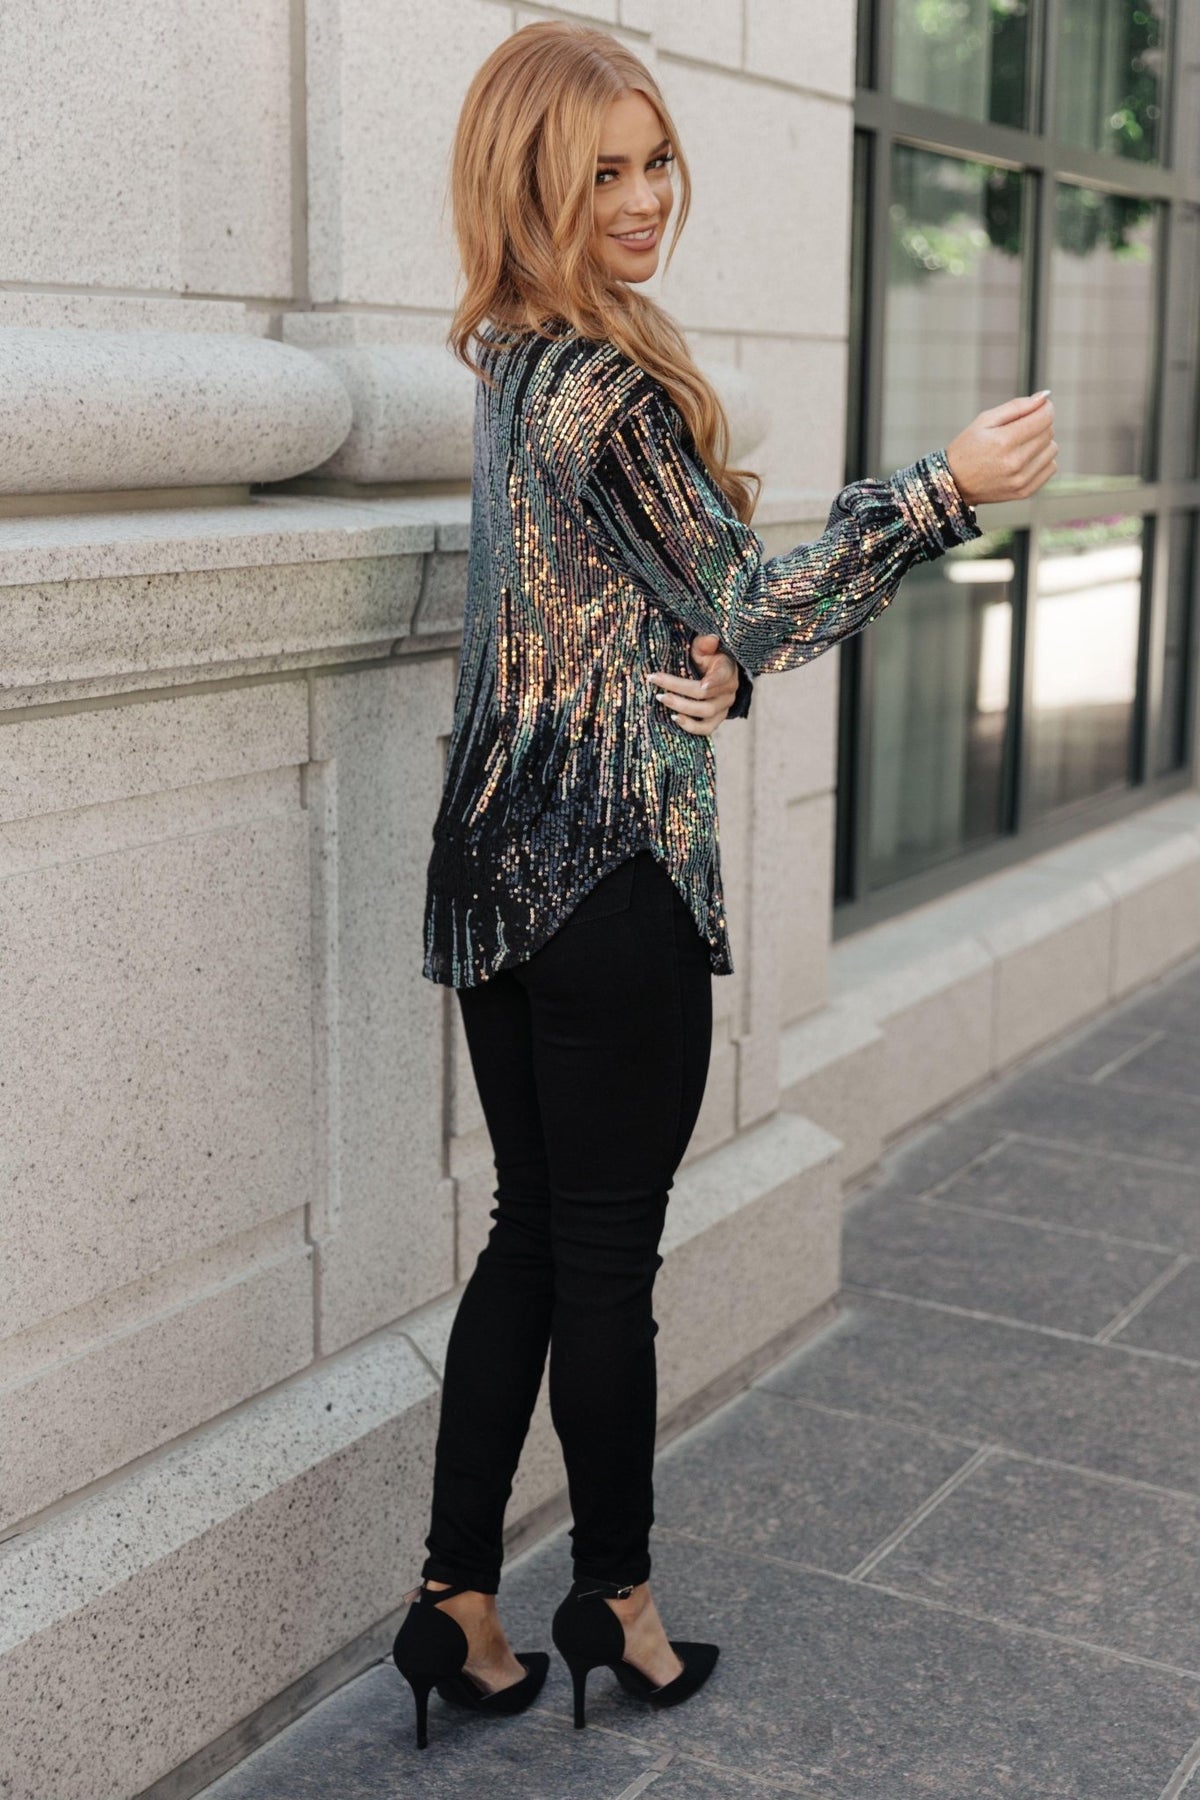 Too Glitz to Glam Button Up Shirt - Happily Ever Atchison Shop Co.